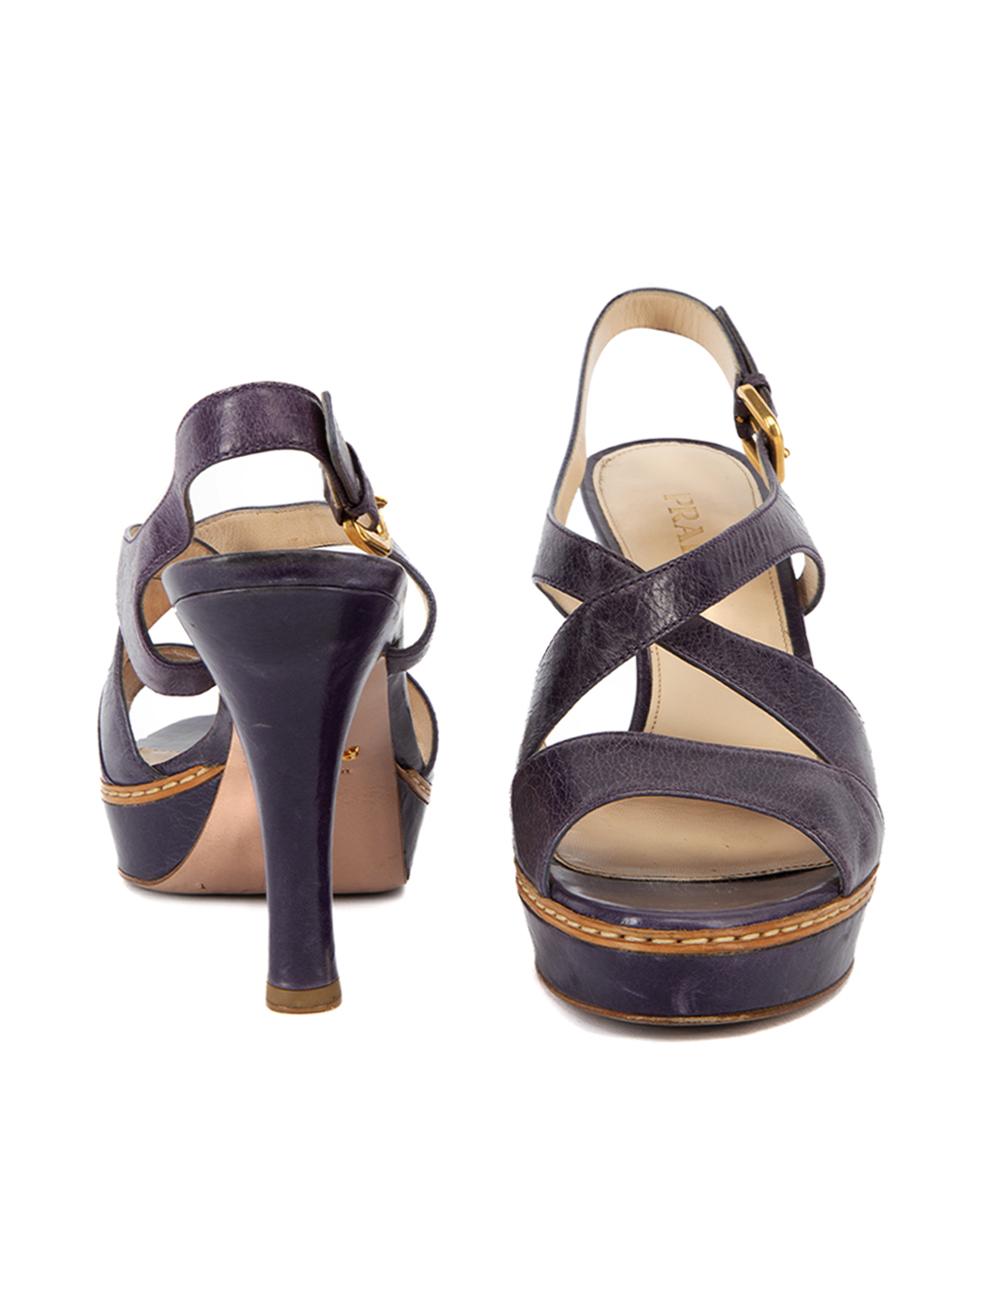 Pre-Loved Prada Women's Purple Leather Cross Strap Platform Sandals In Excellent Condition In London, GB